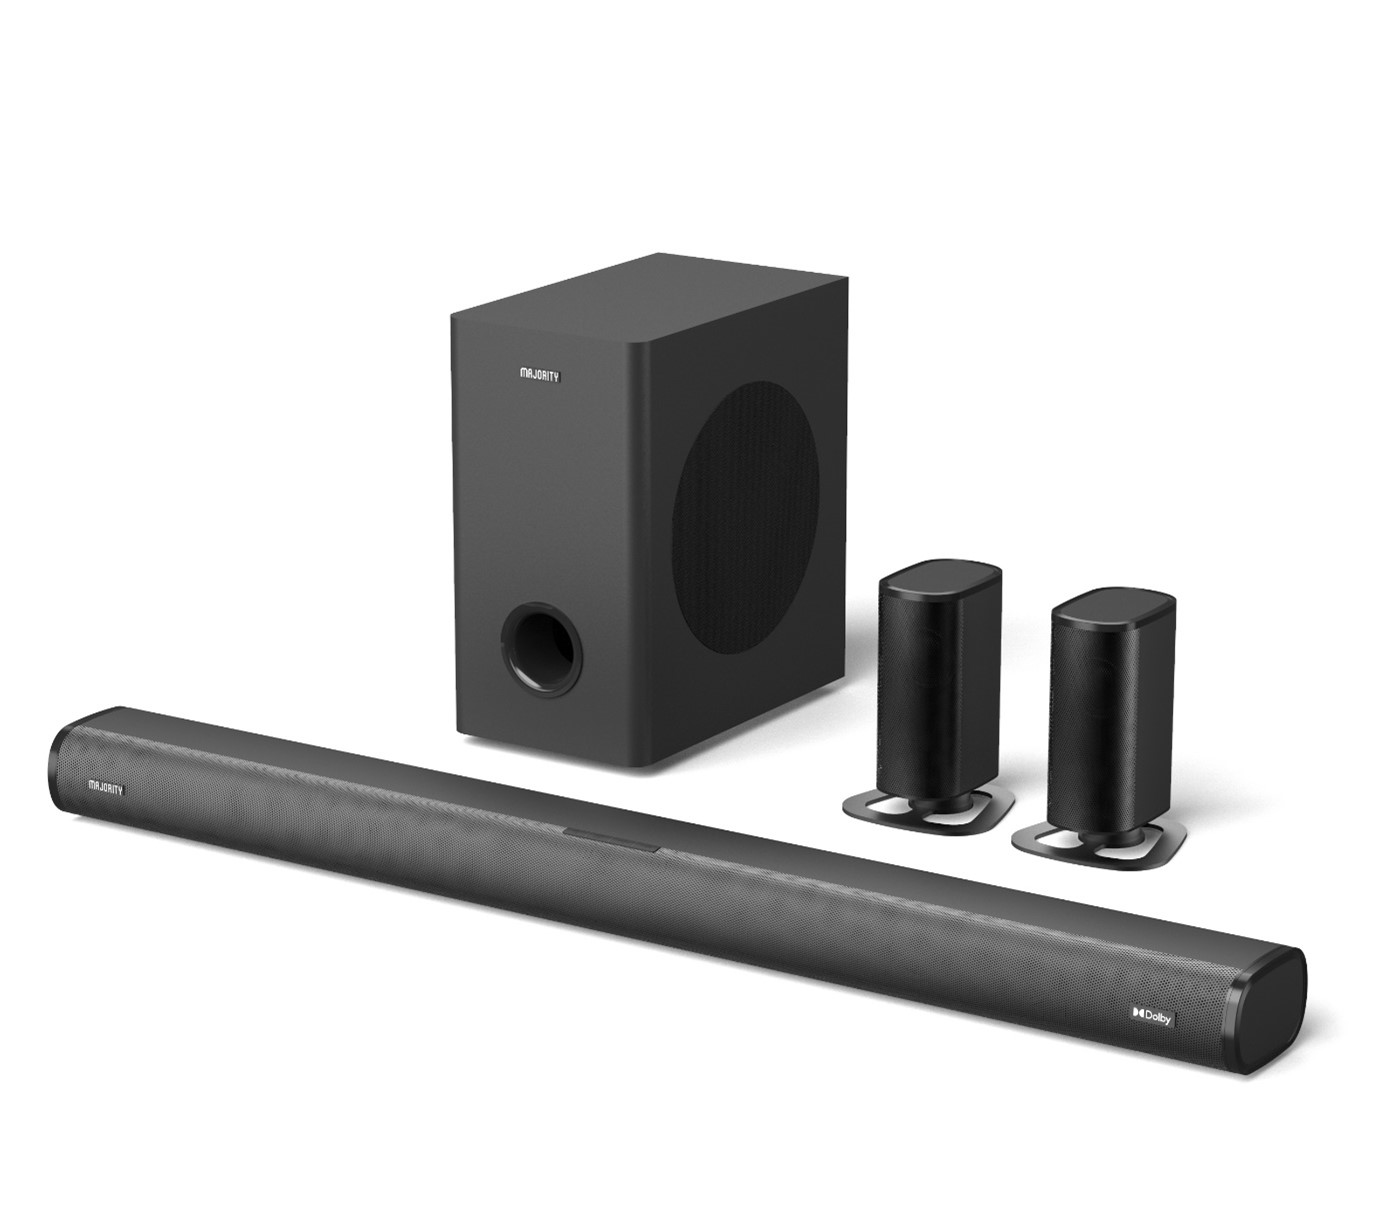 Rechargeable Detachable Satellite Speakers Multi-Connection including HDMI ARC & Bluetooth MAJORITY Everest 5.1 Dolby Audio Surround Sound System with Soundbar 300 WATT with Wireless Subwoofer 